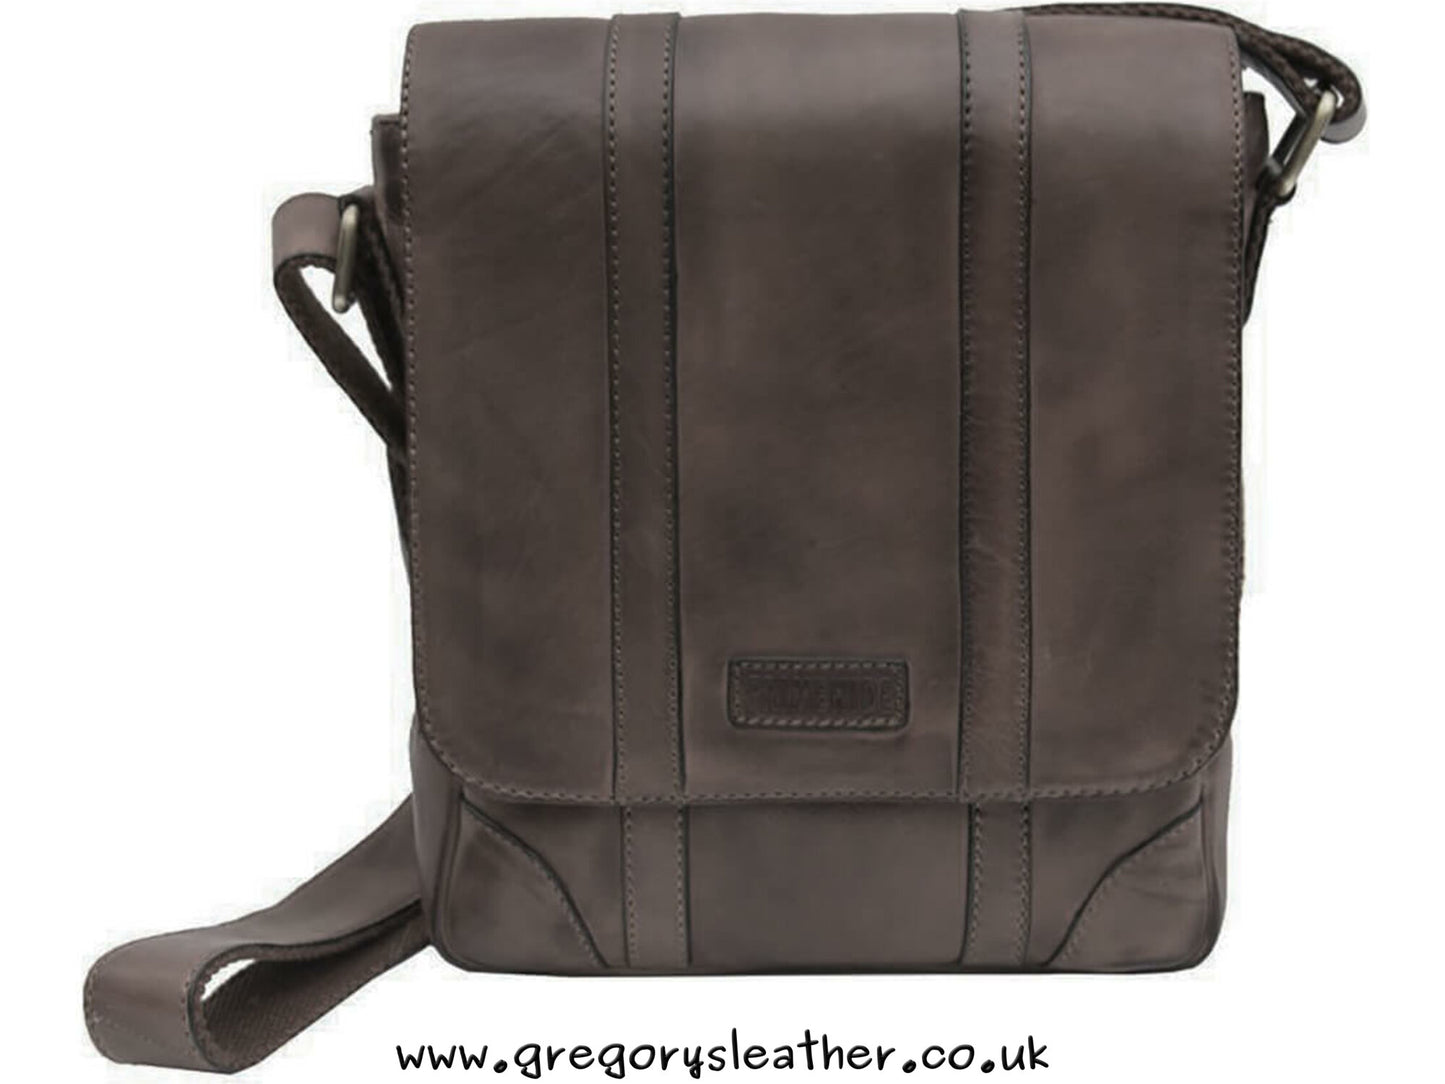 Brown Ridgeback Small Leather Messenger Bag - by Prime Hide